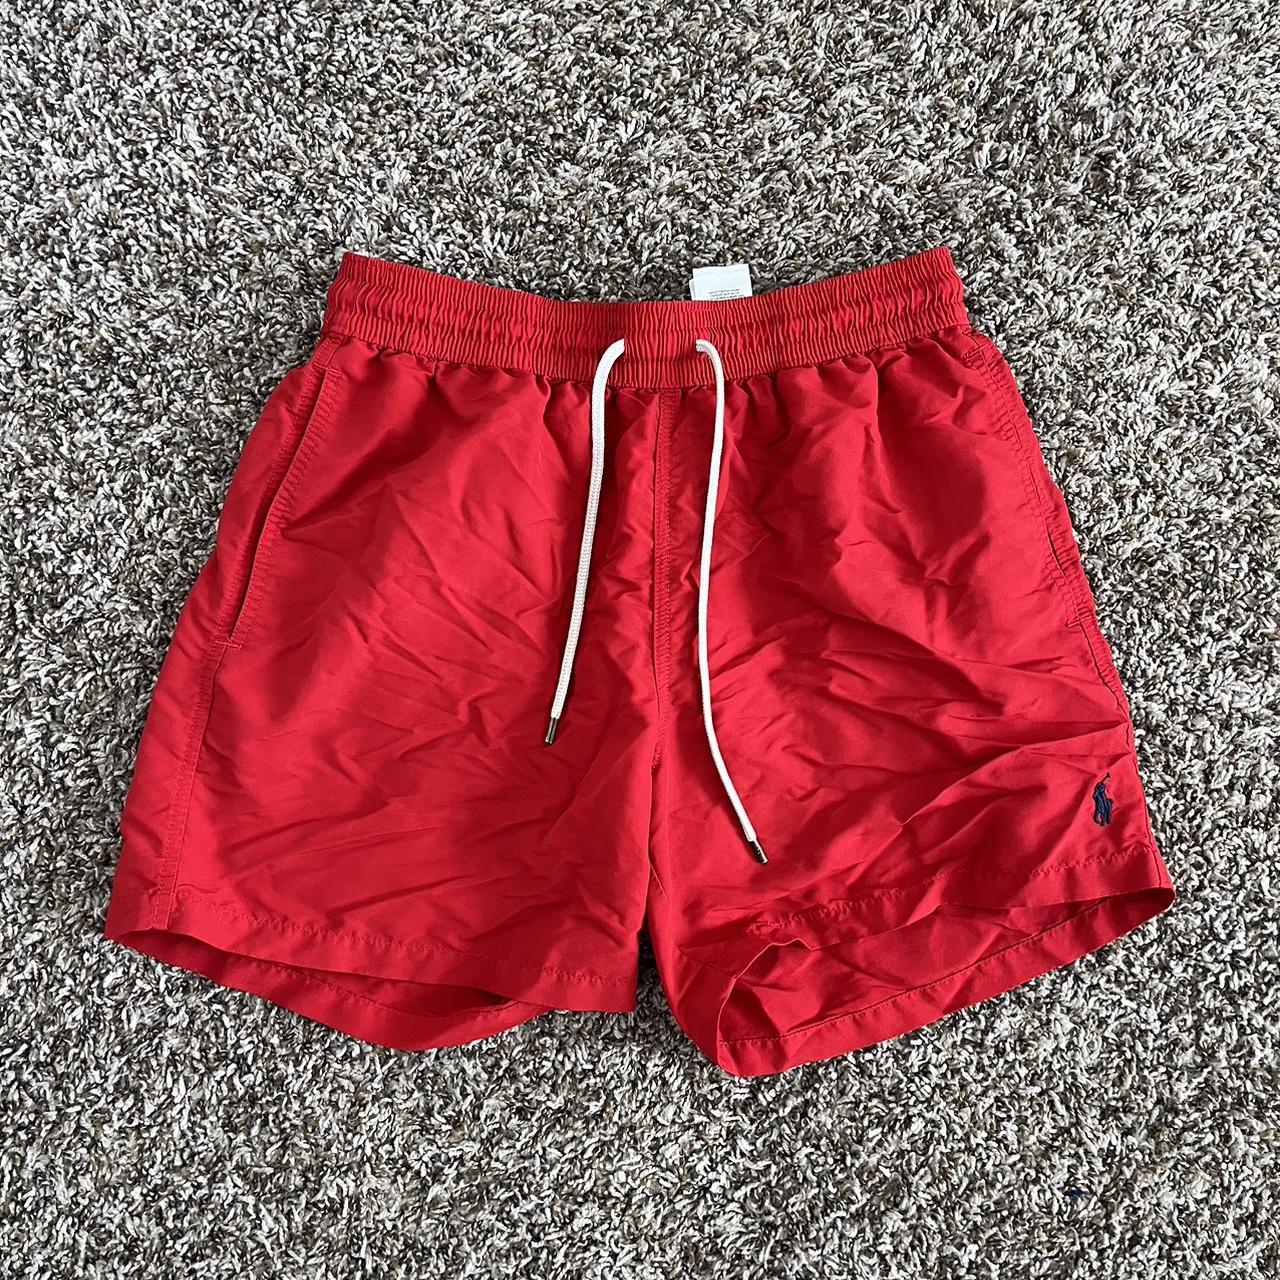 Polo Ralph Lauren Red Swim Shorts They are worn so... - Depop